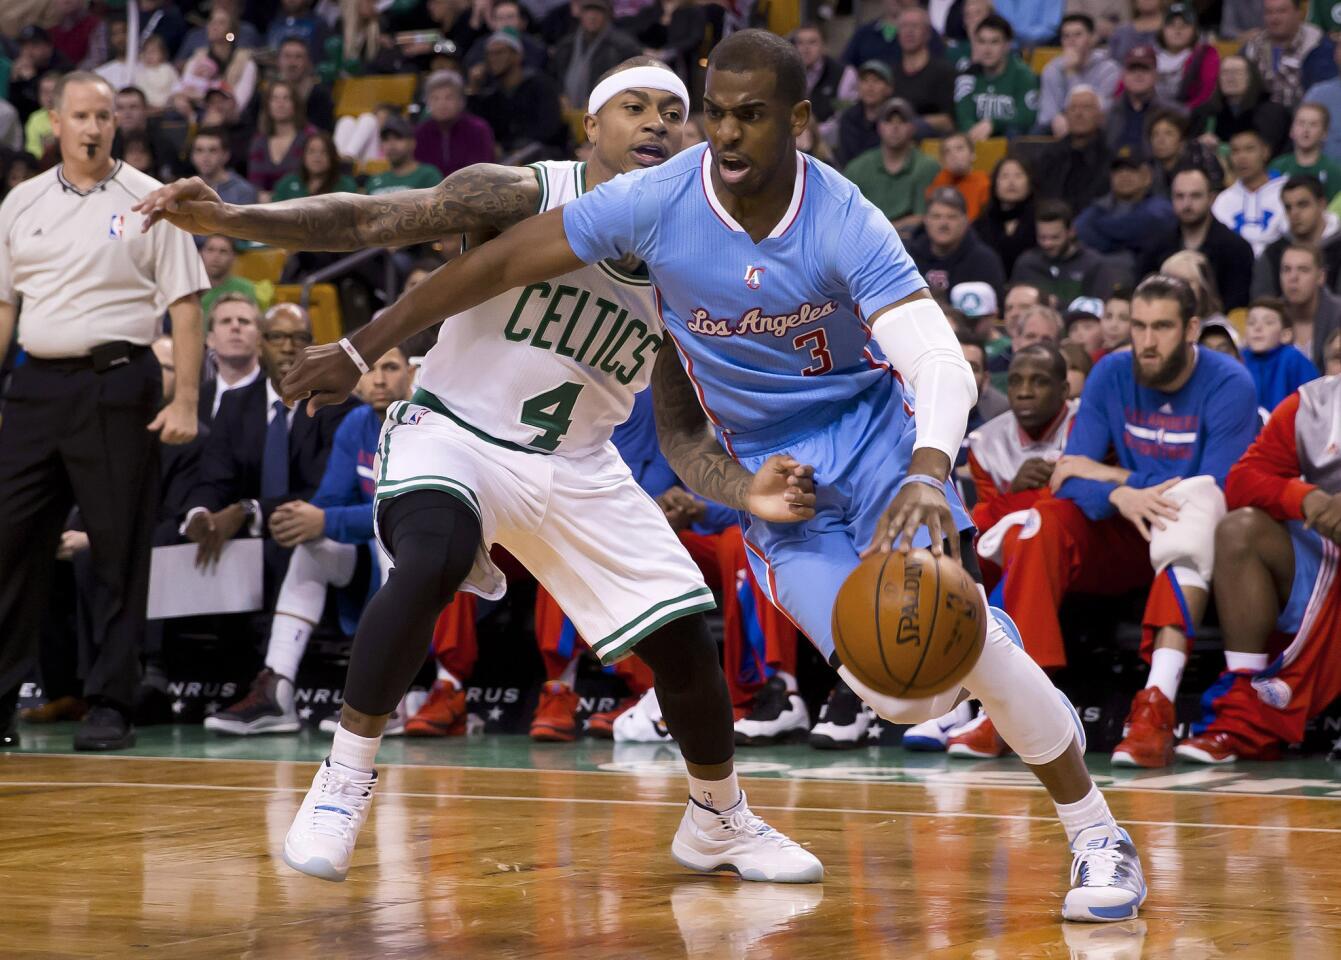 Clippers point guard Chris Paul drives against Celtics point guard Isaiah Thomas in the first half Sunday.